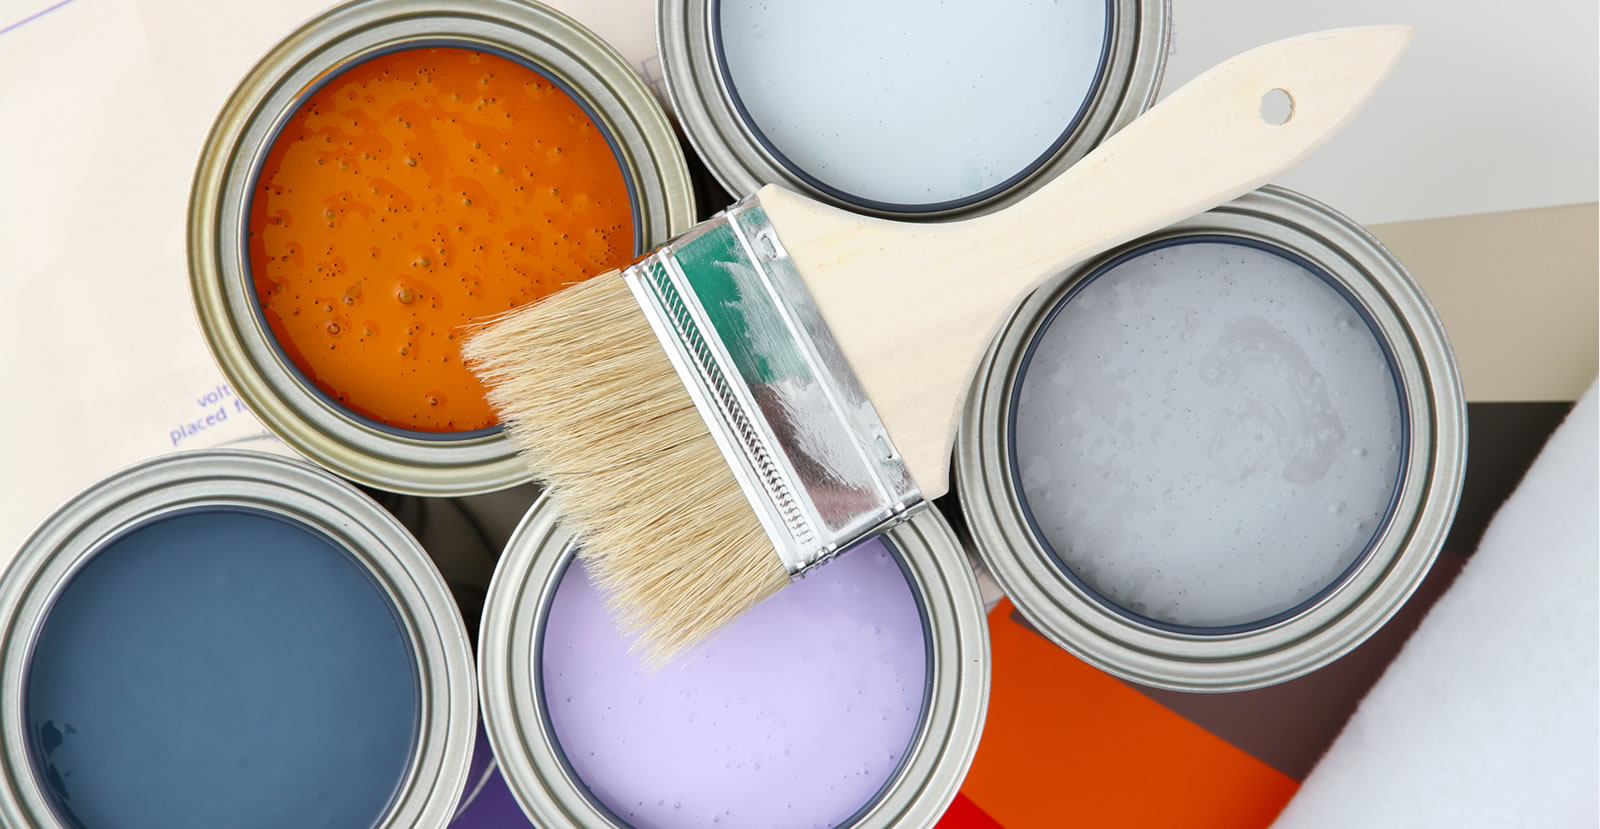 Close up image of a wide paintbrush resting on top of five paint cans